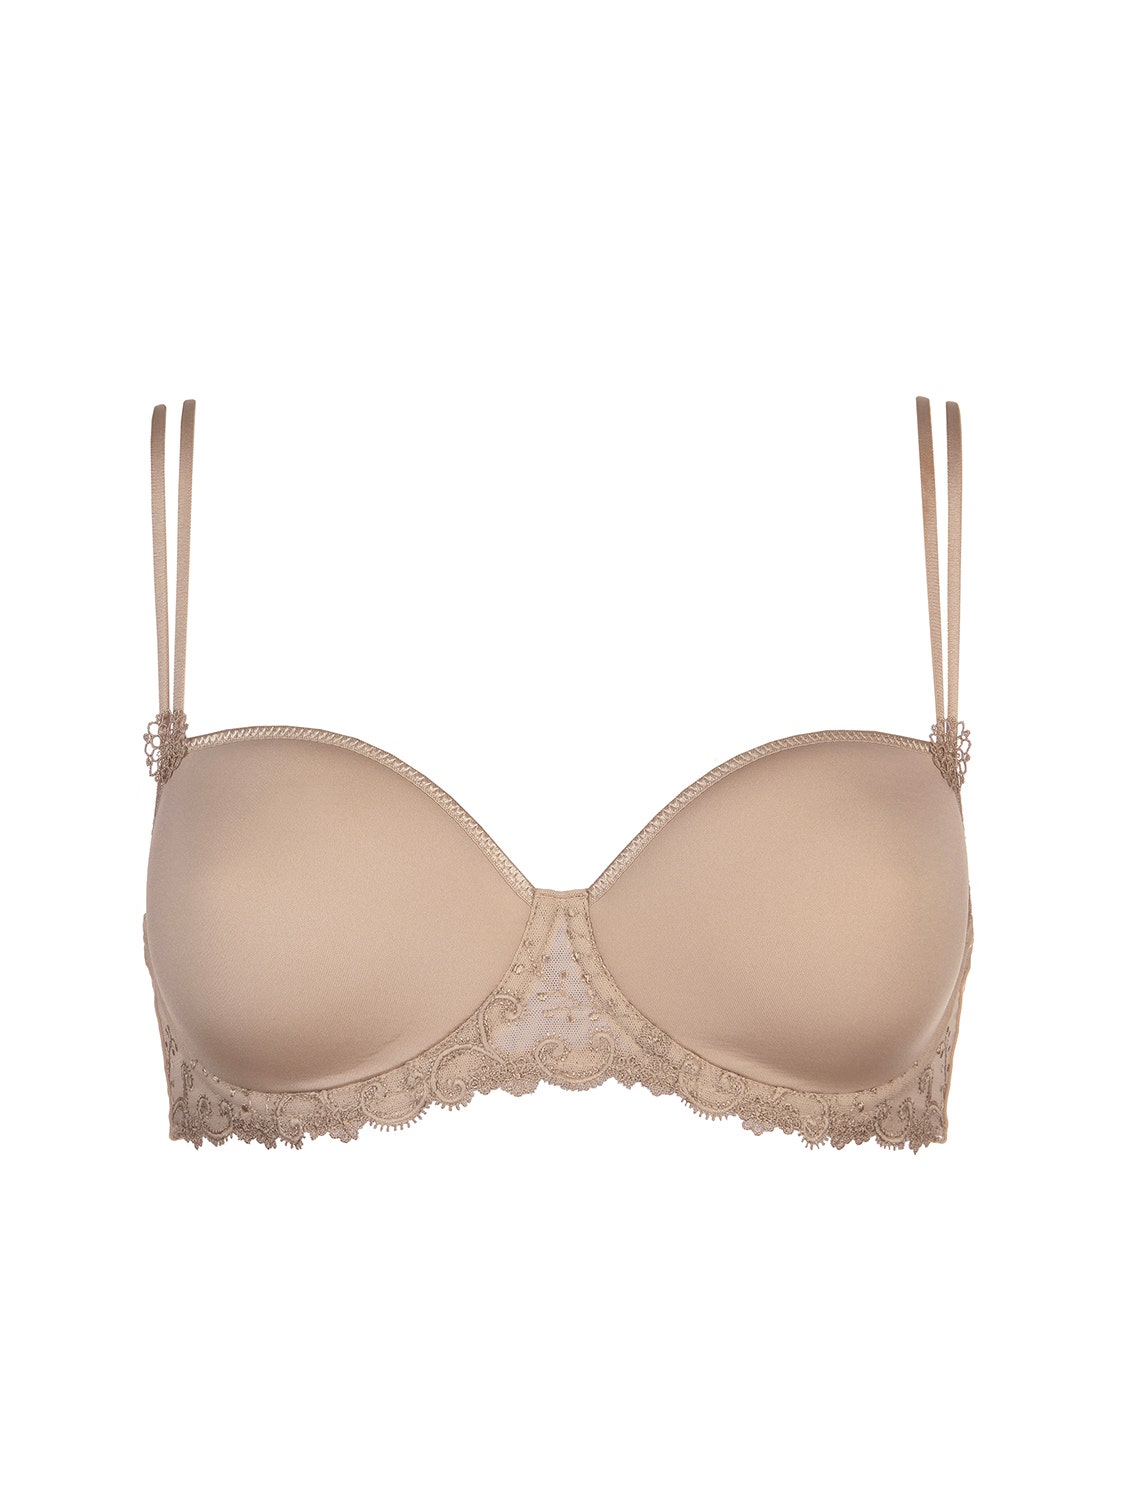 3d-moulded-bra-nude-delice-40